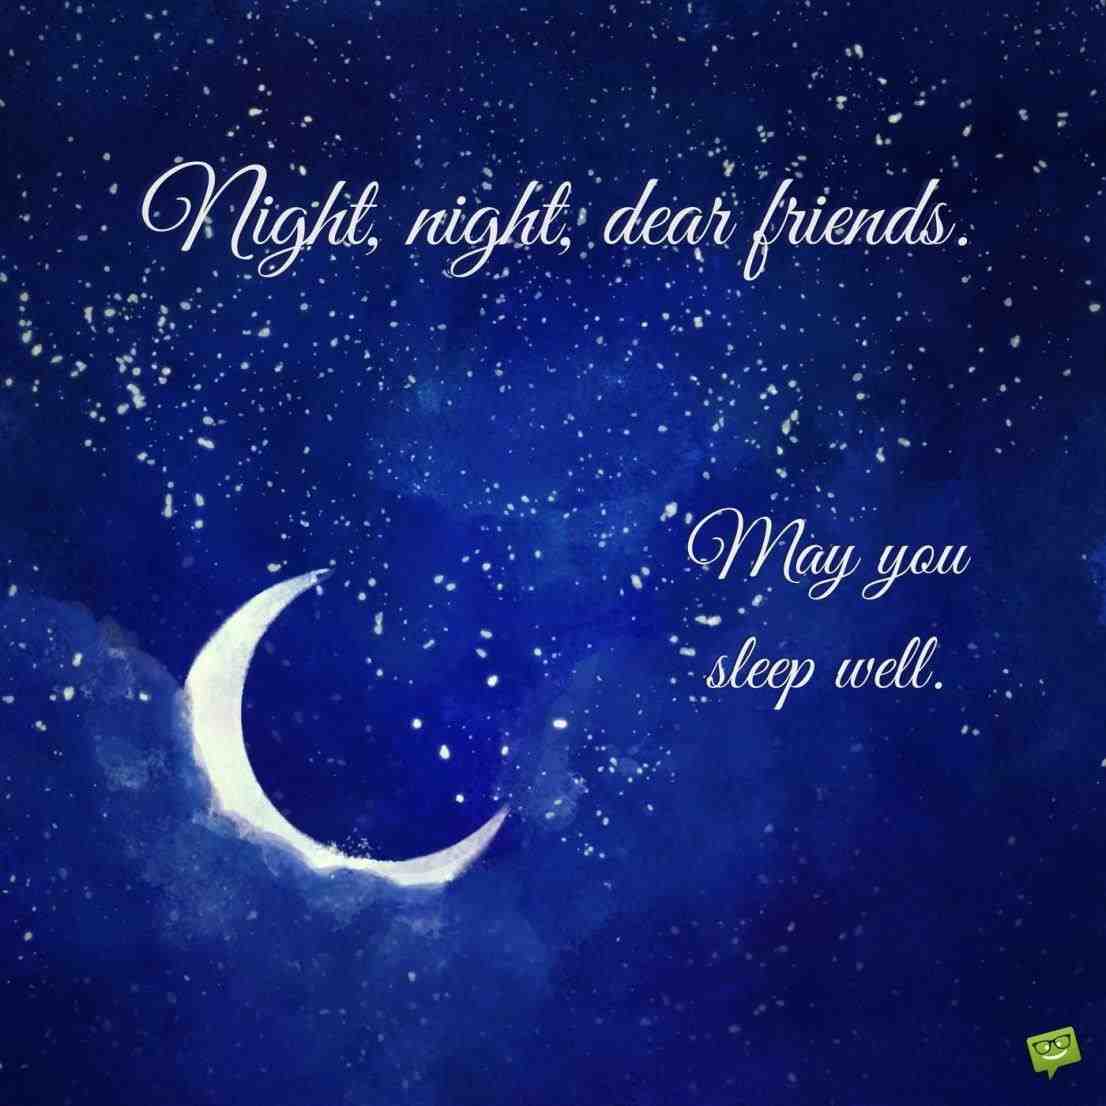 Wallpaper HD With Quotes And Wishes Image Rhcom Sleep Good Night